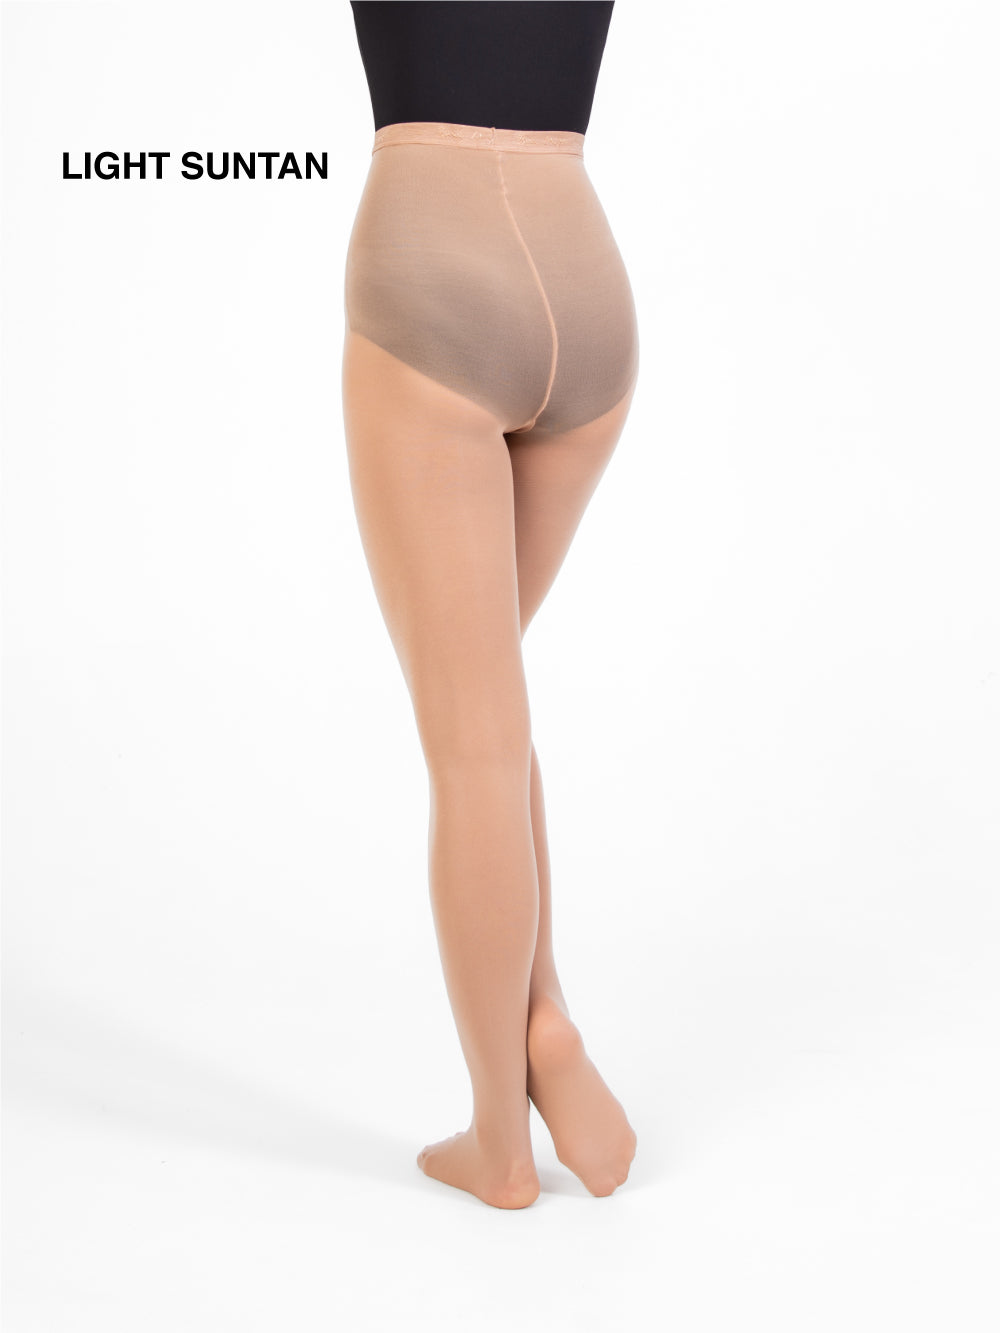 SALE: Womens Plus Size Footless Tights - Footless Tights, Body Wrappers  A33X